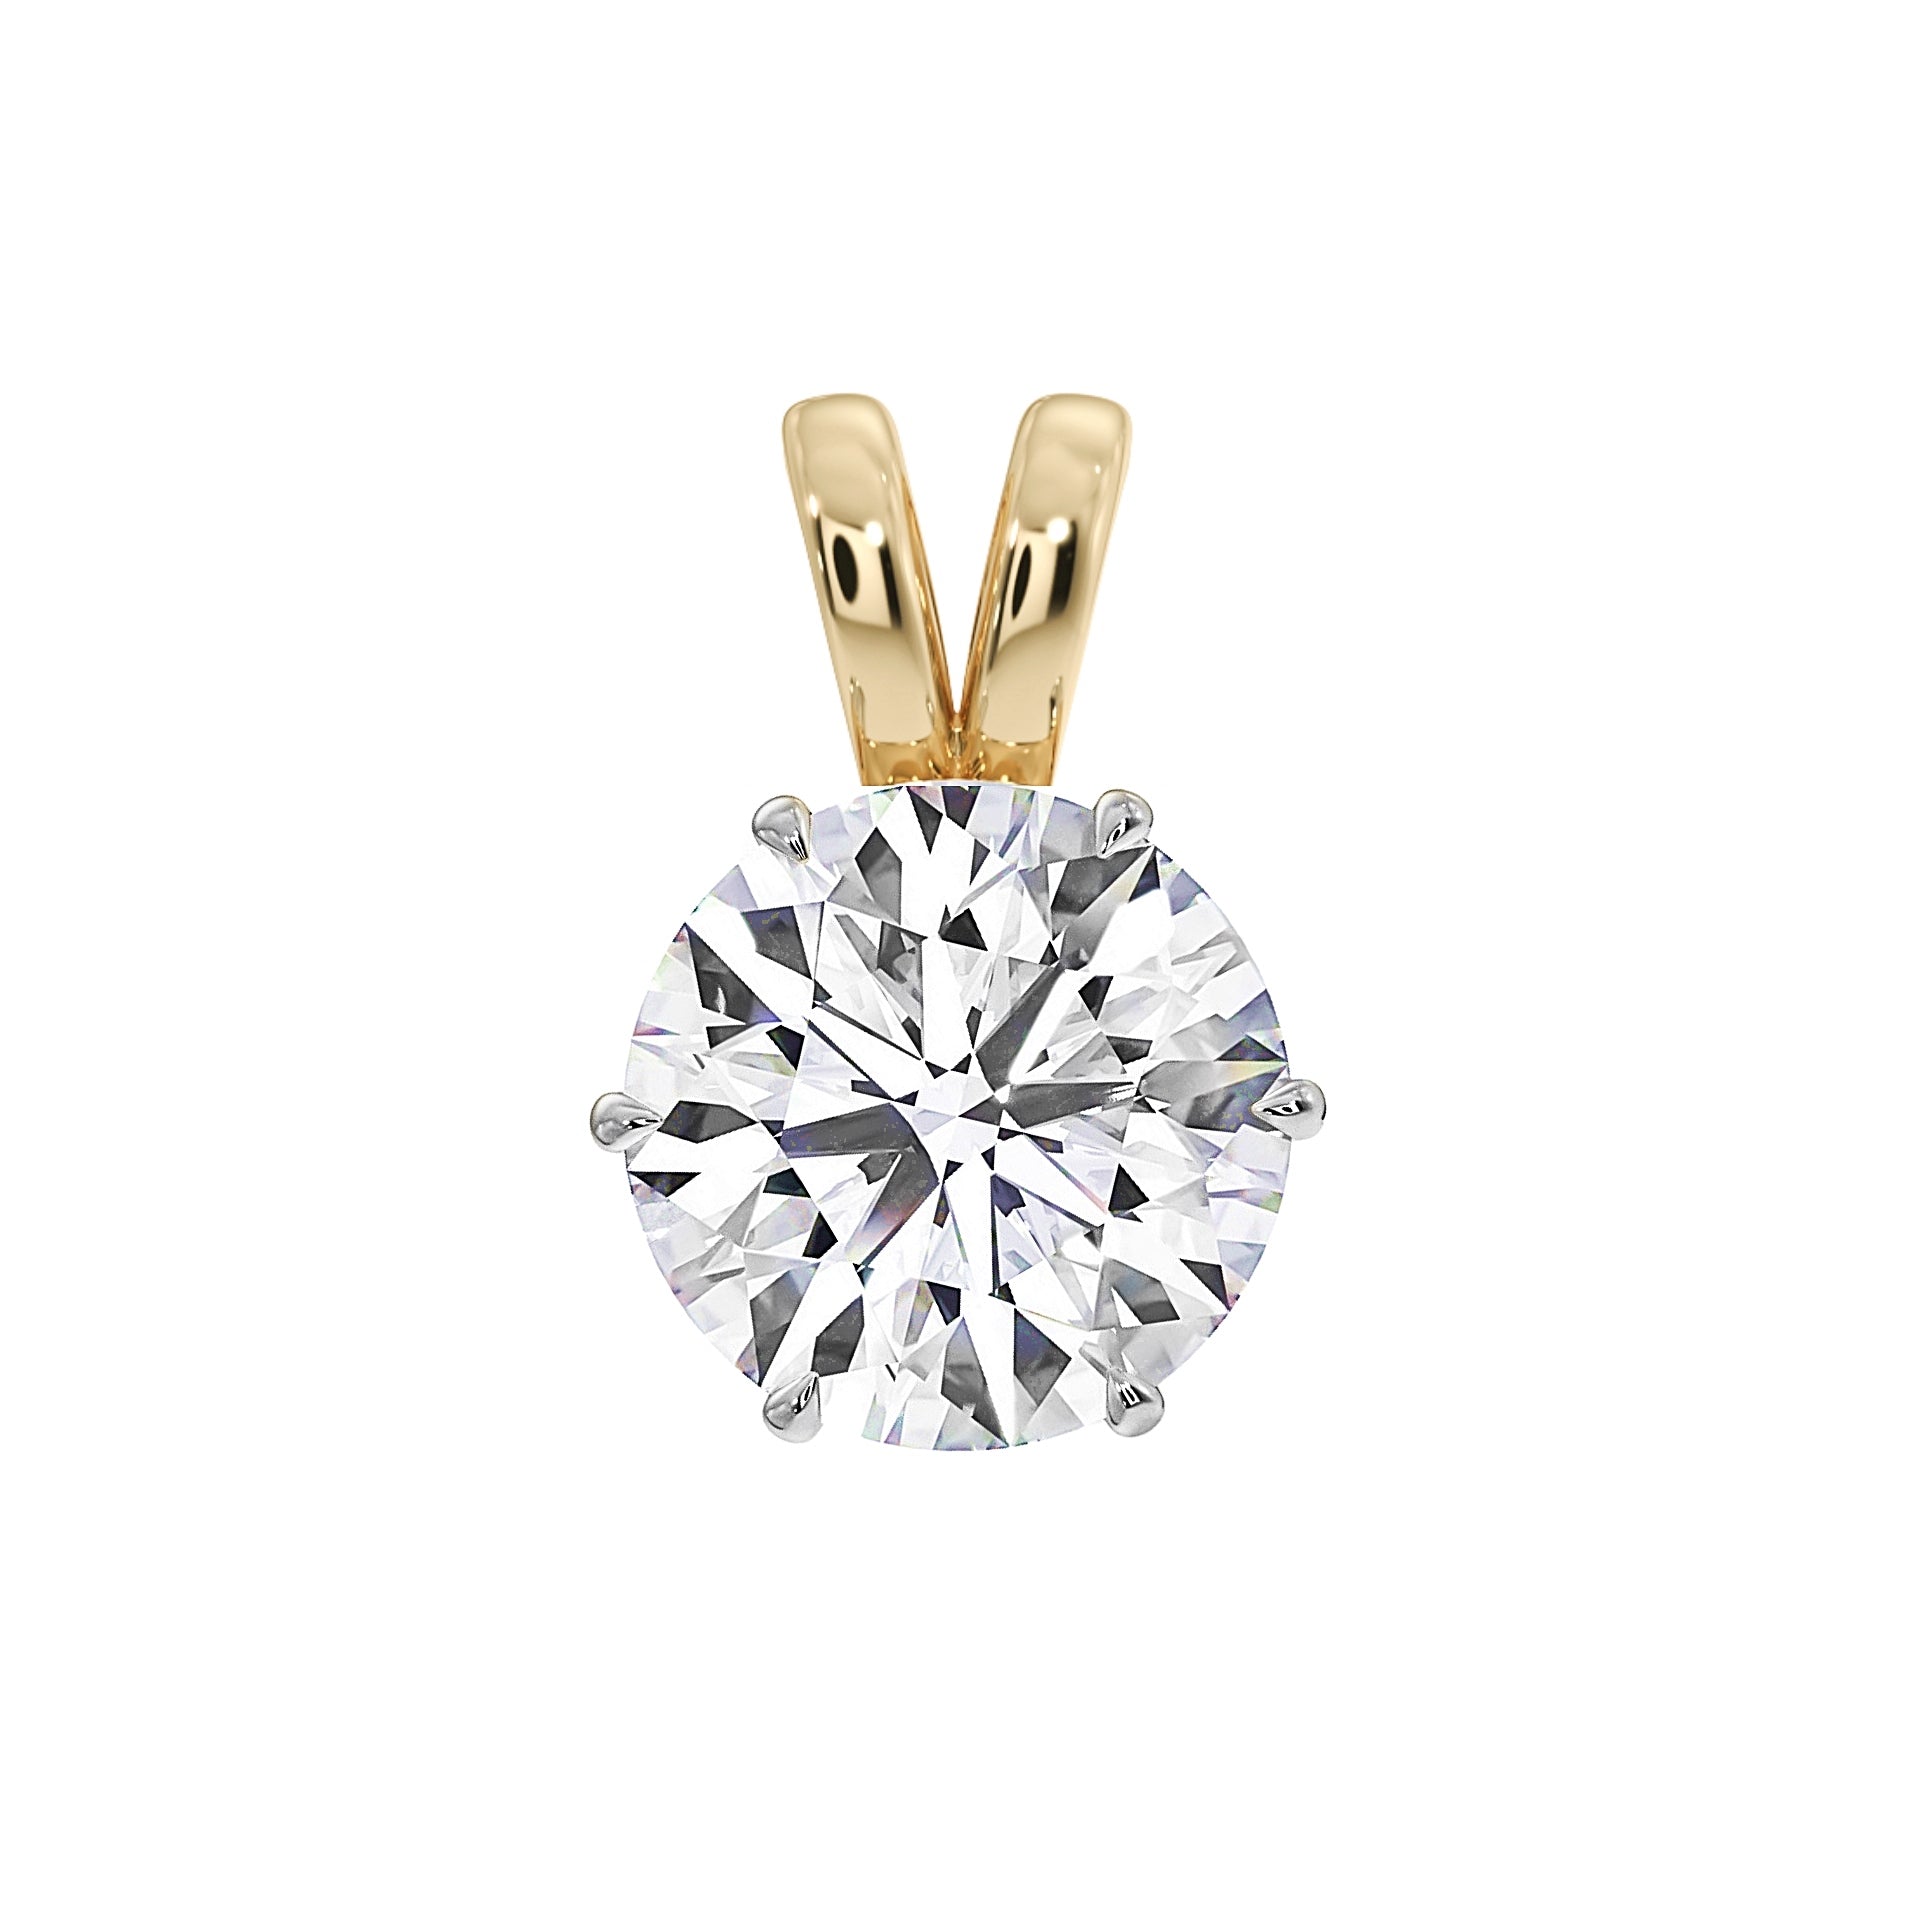 Front view of MYZA 3 carat IGI certified lab-grown diamond Pendant for women delicately set in secure six-prong settings crafted in 18kt hallmark yellow gold.